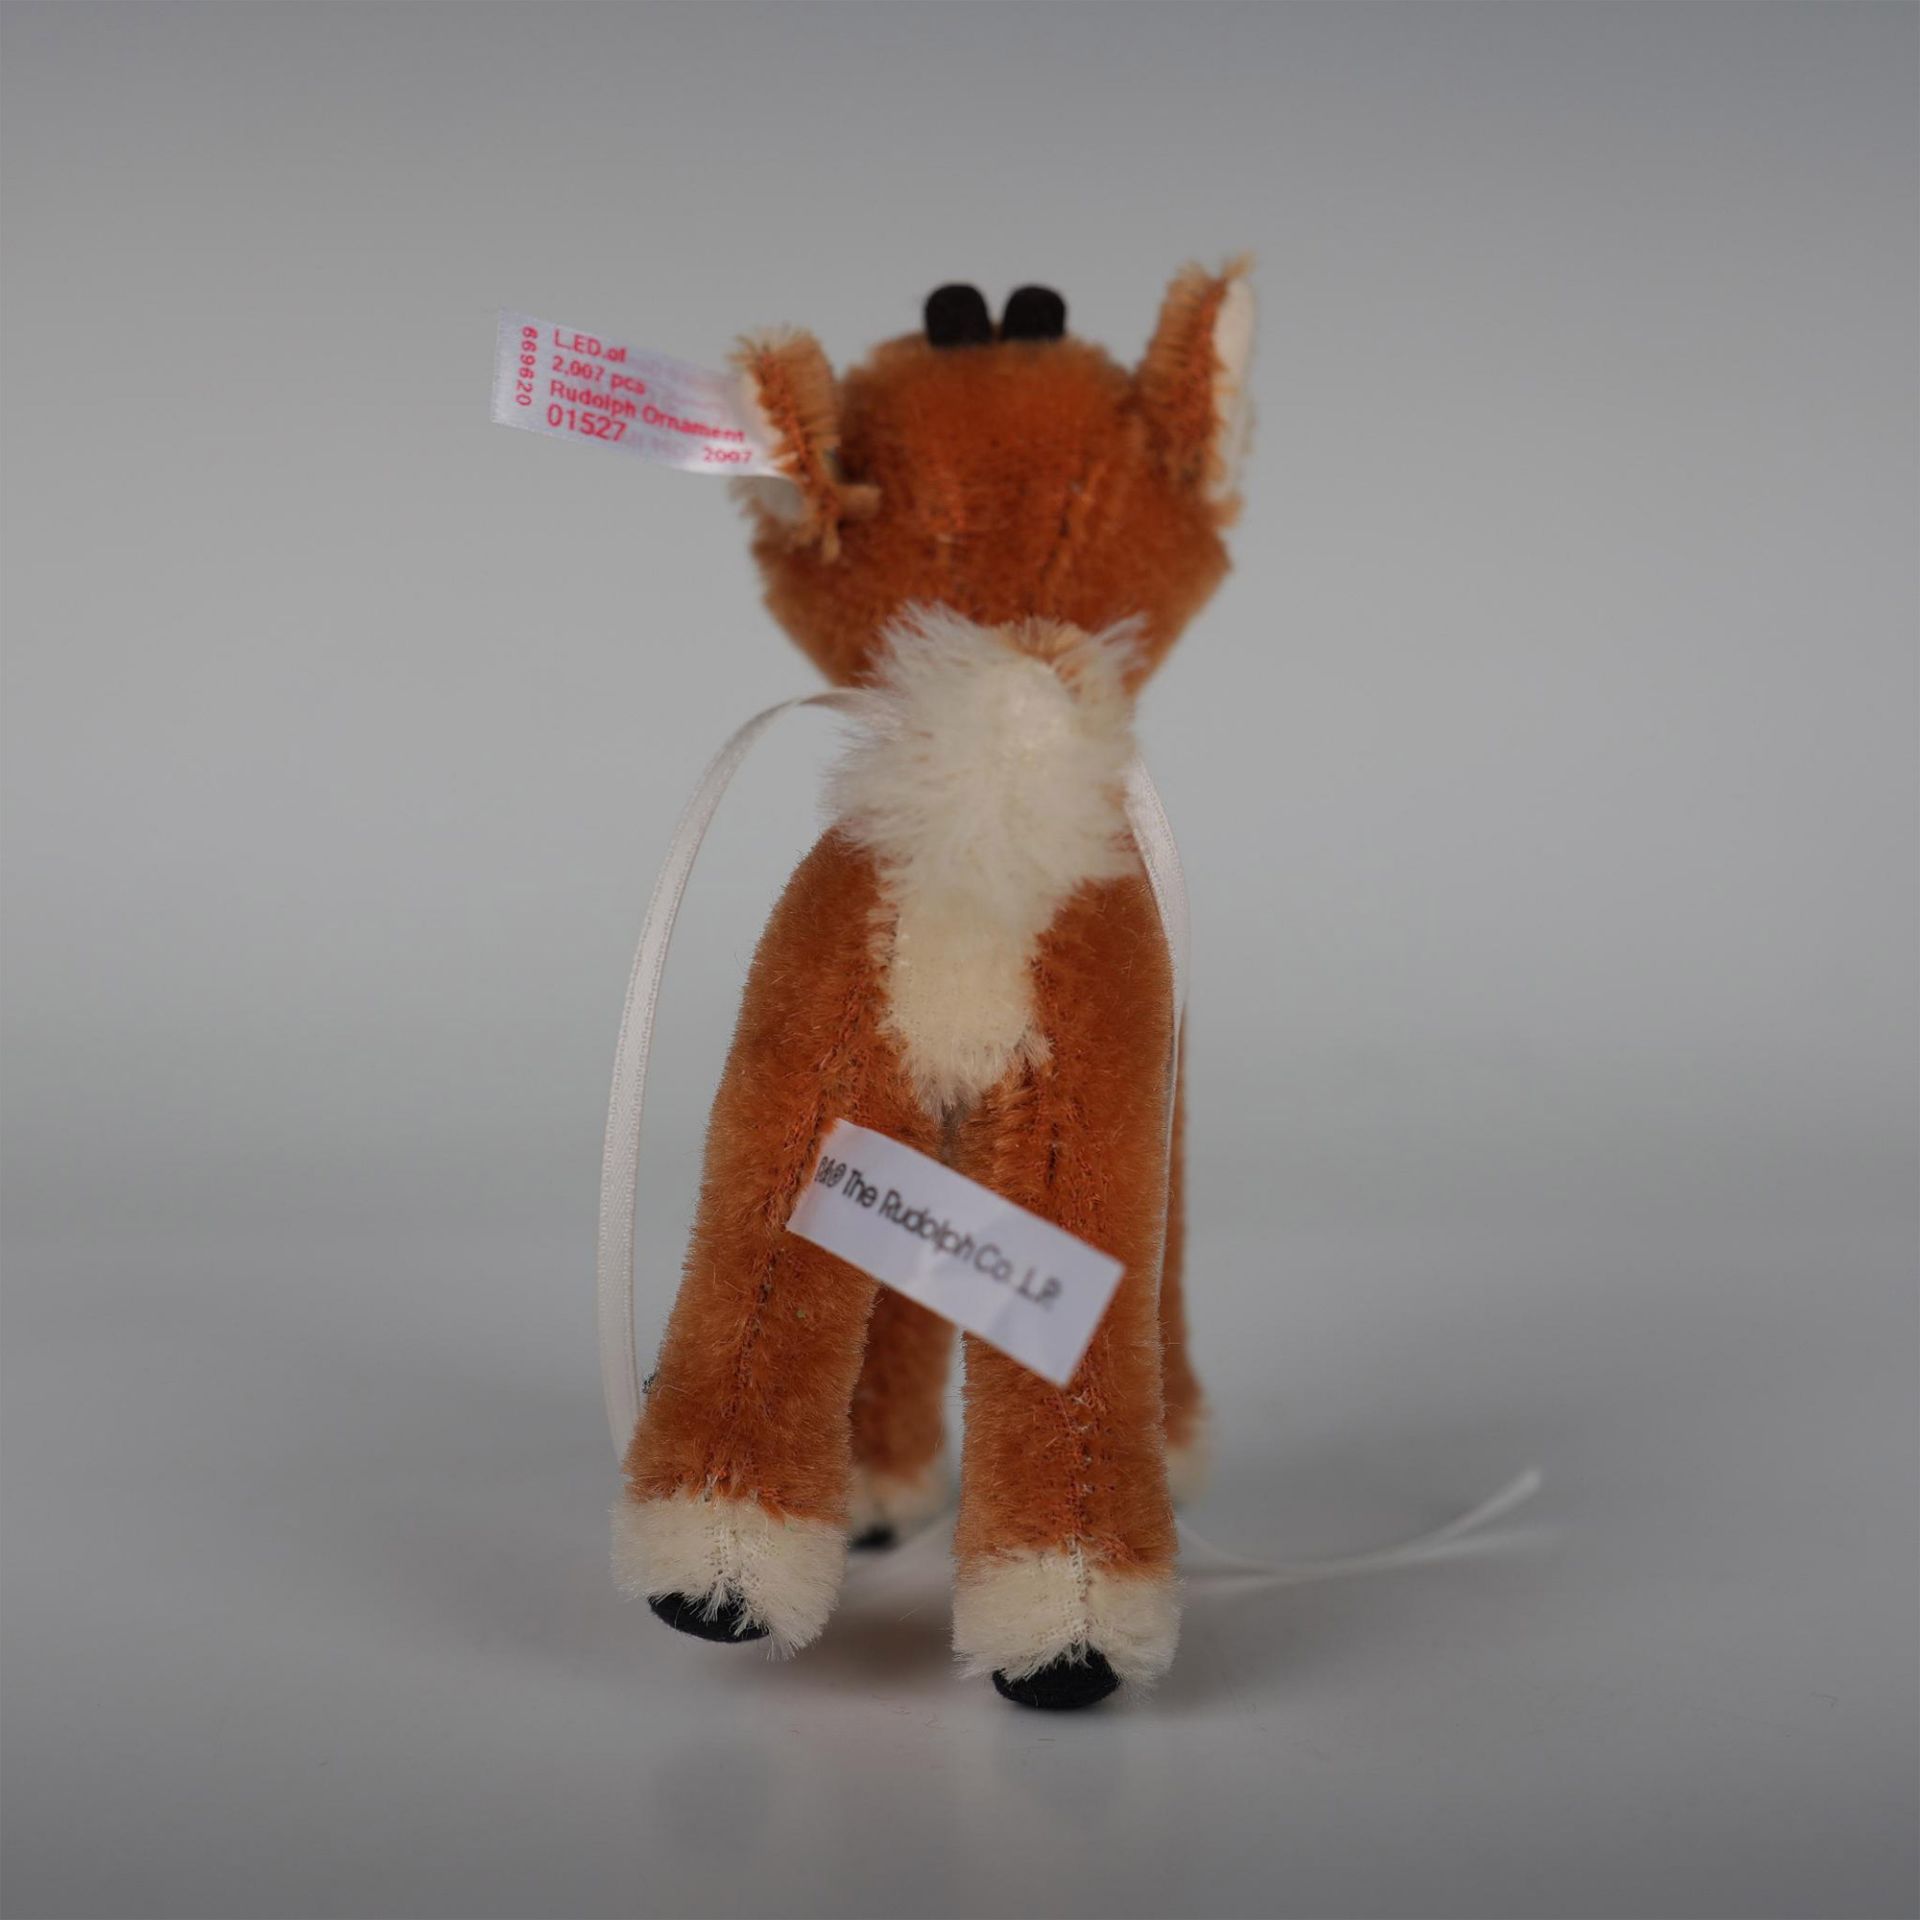 Steiff North American Rudolph the Red-Nosed Reindeer - Image 3 of 5